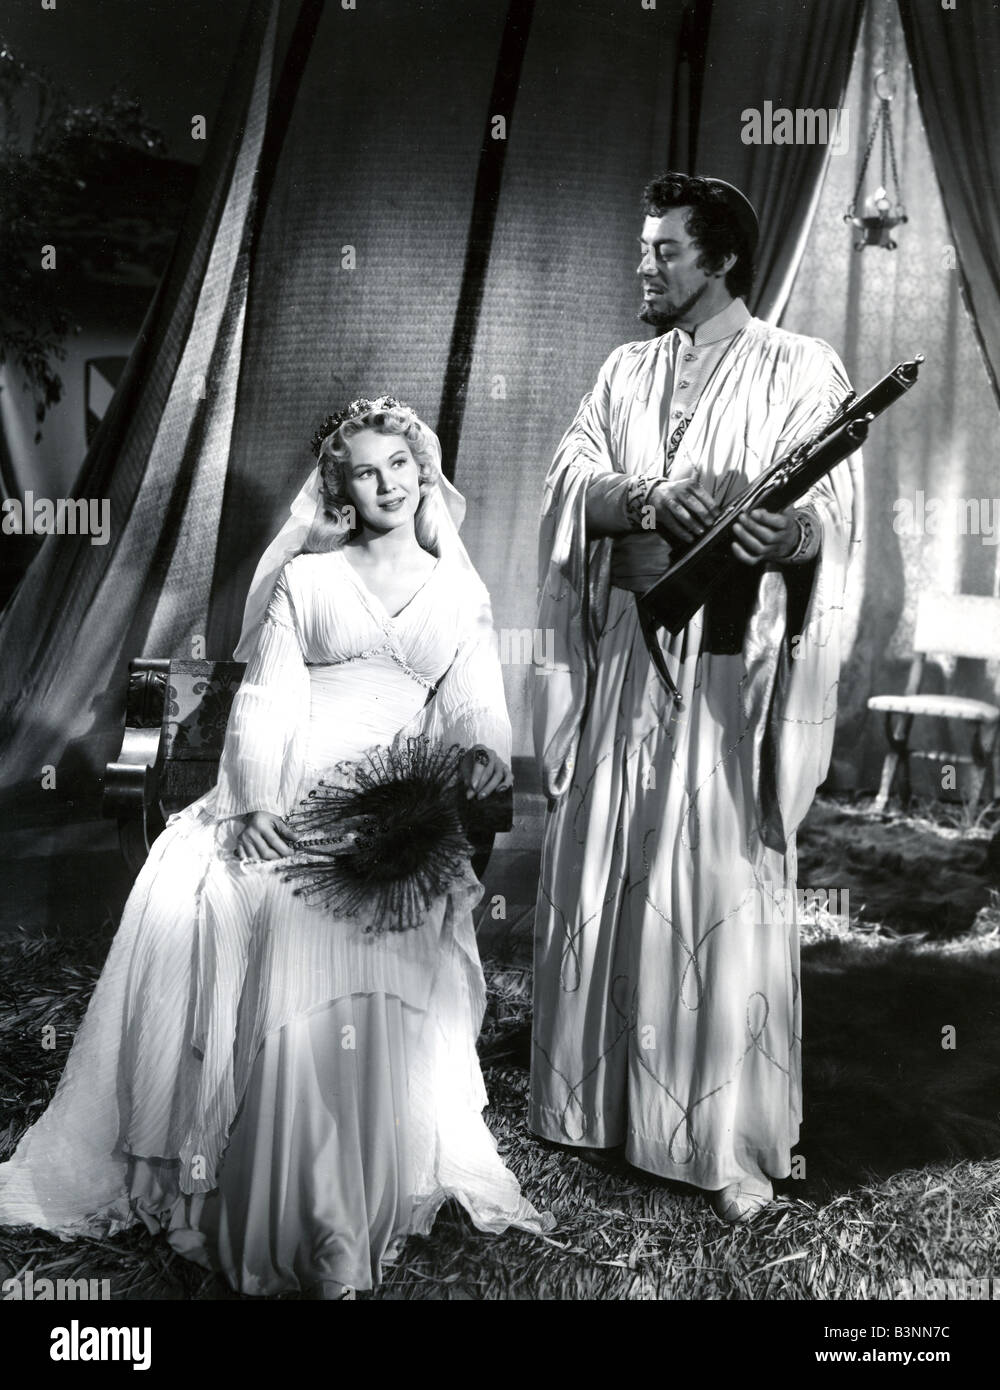 KING RICHARD AND THE CRUSADERS 1954 Warner film with Virginia Mayo as Lady Edith and Rex Harrison as Saladin Stock Photo